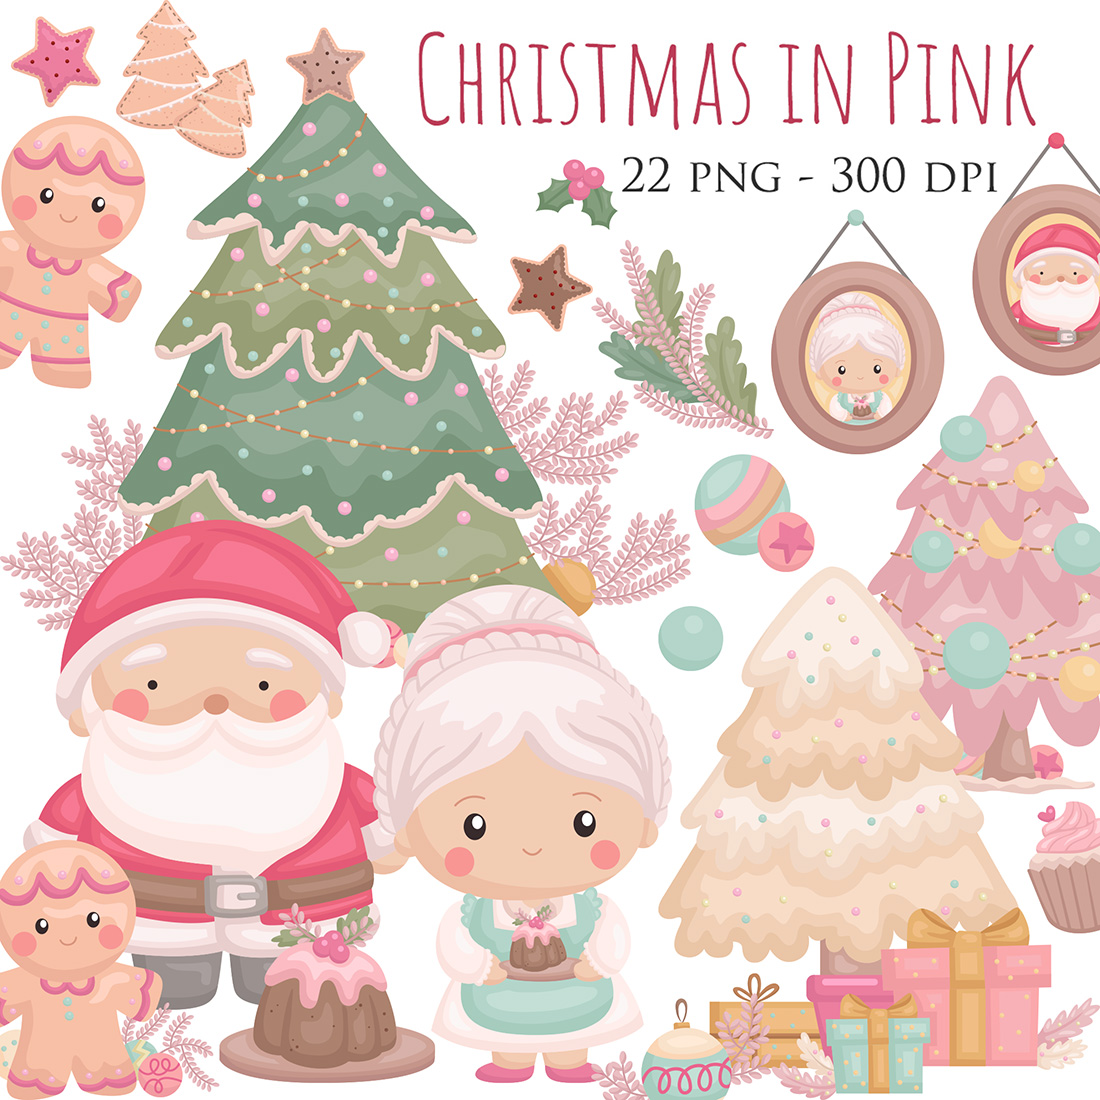 Cute Christmas in Pink Decoration Background Ornaments Accessories Tree Santa Claus Gingerbread Grandmother Character Cartoon Illustration Vector Clipart Sticker cover image.